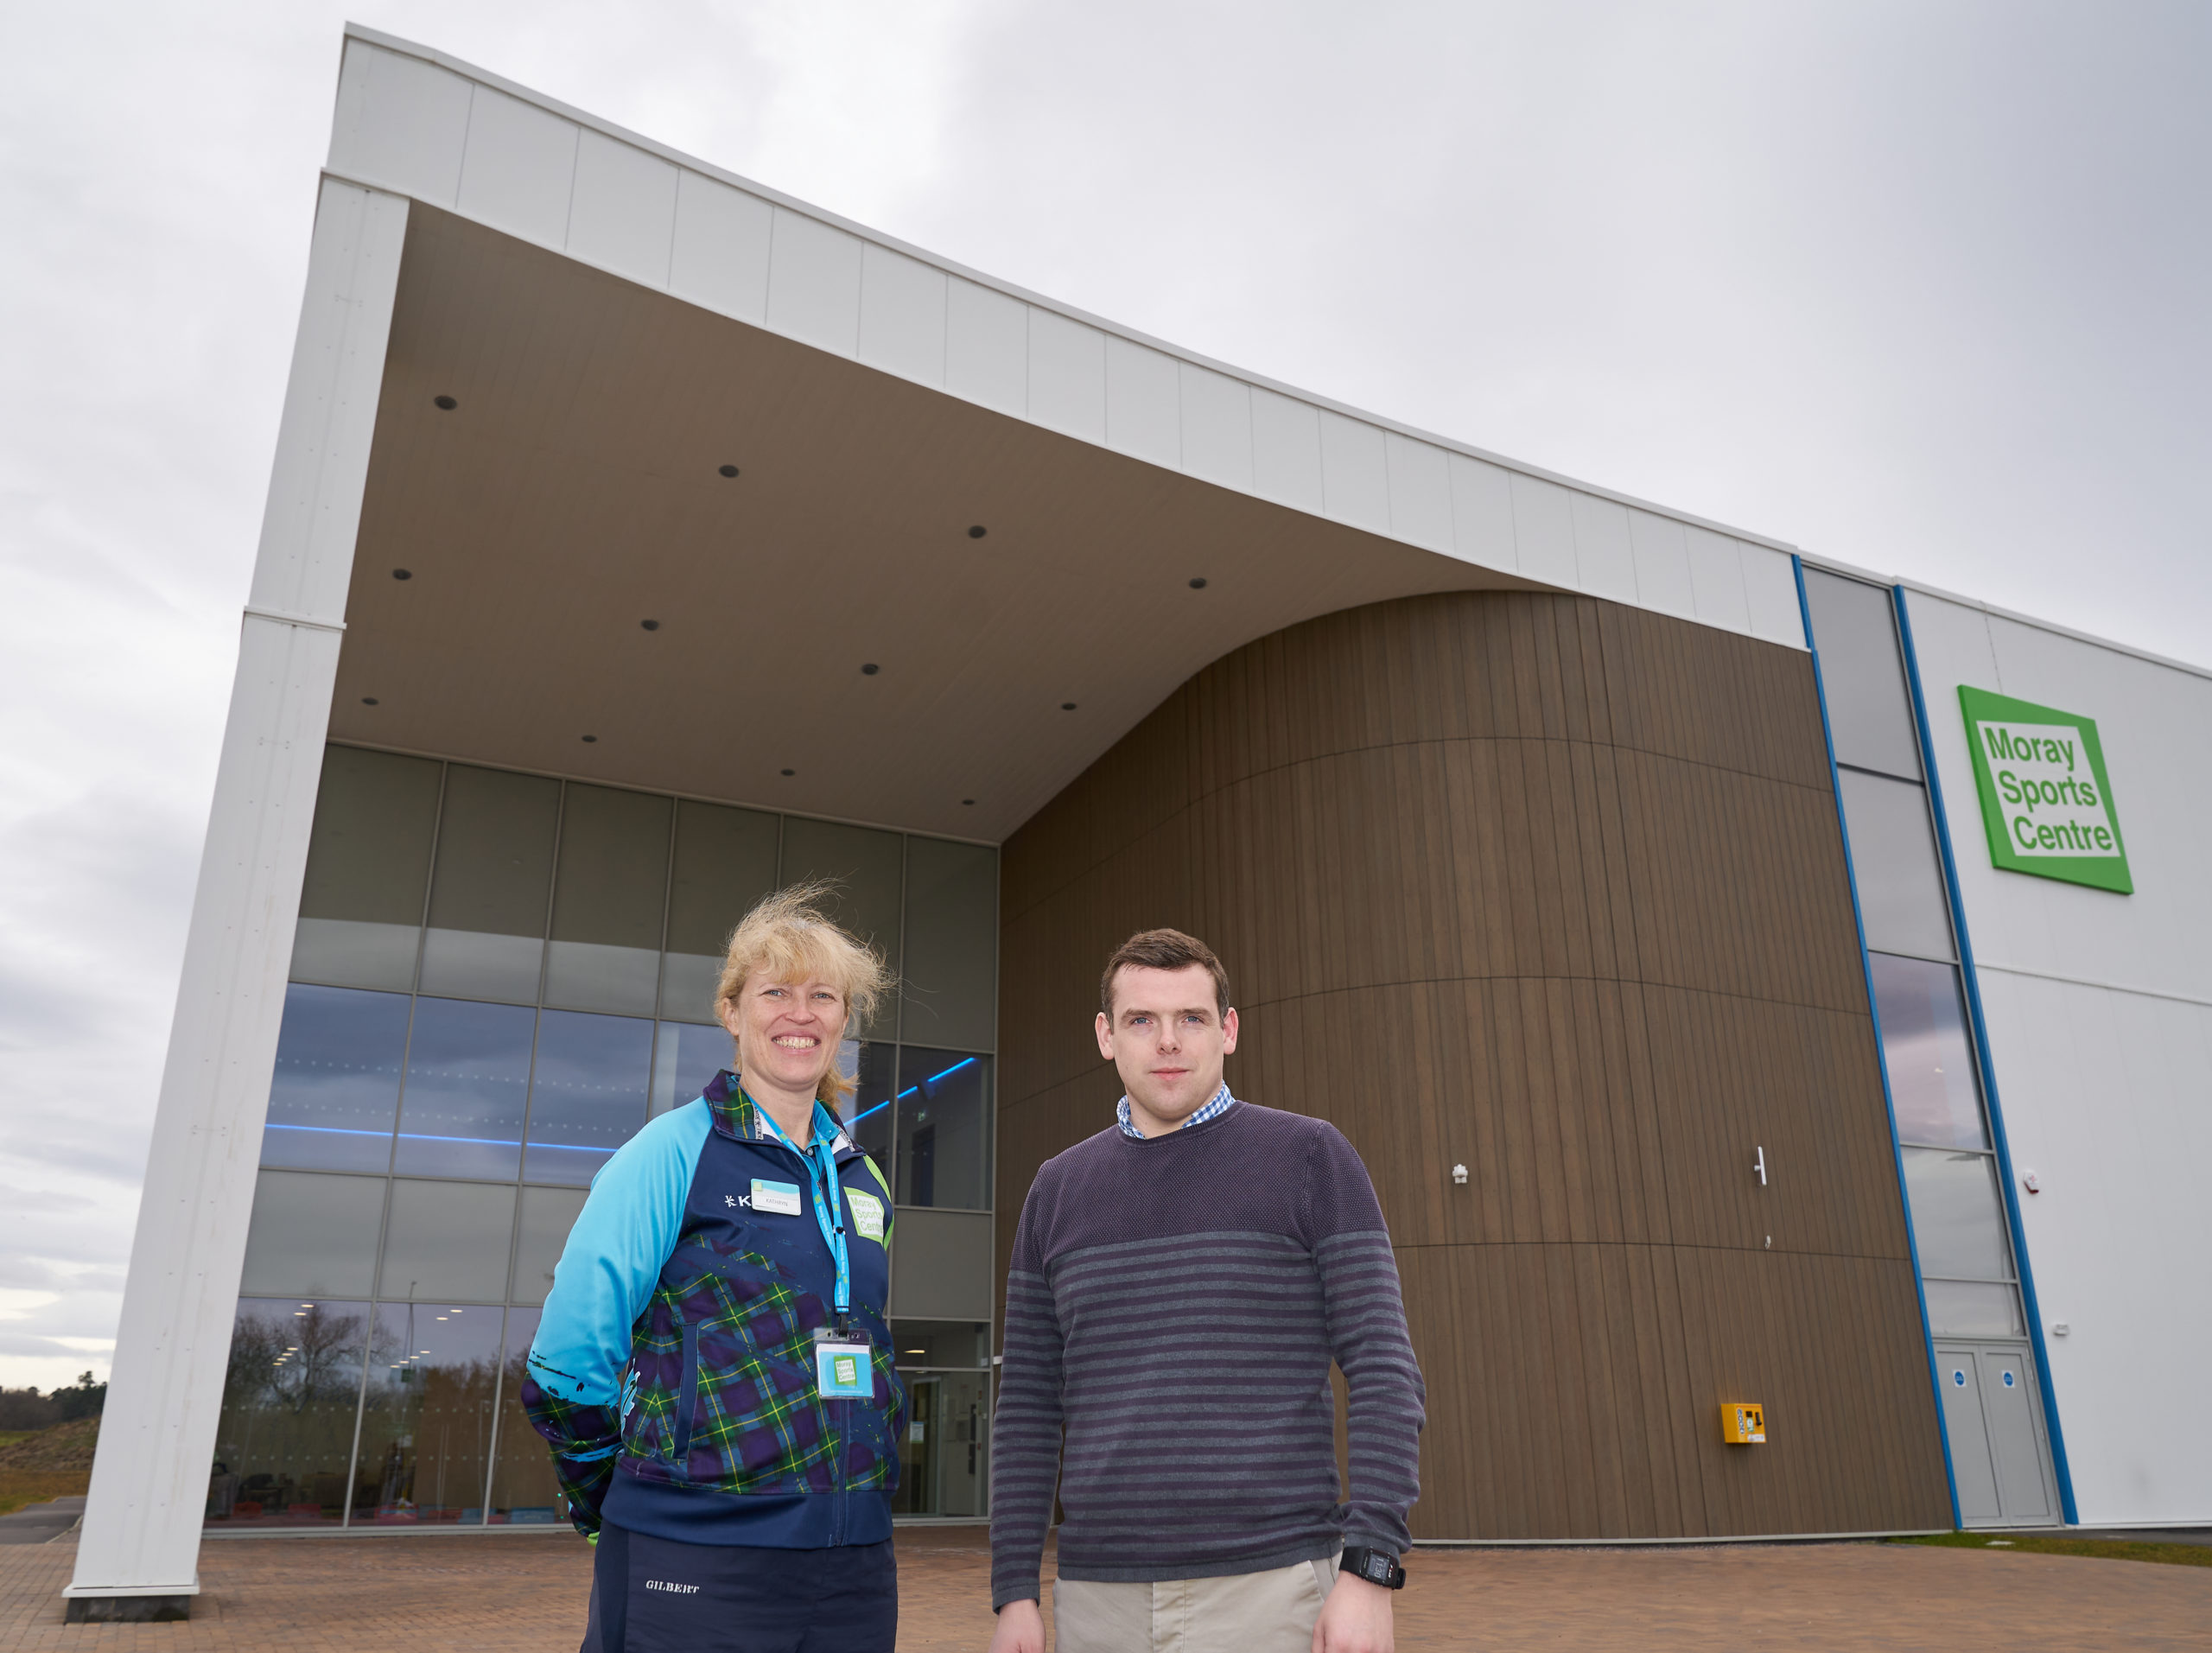 MP Douglas Ross of Moray along with the CEO of Moray Sports Centre, Kathryn Evans.